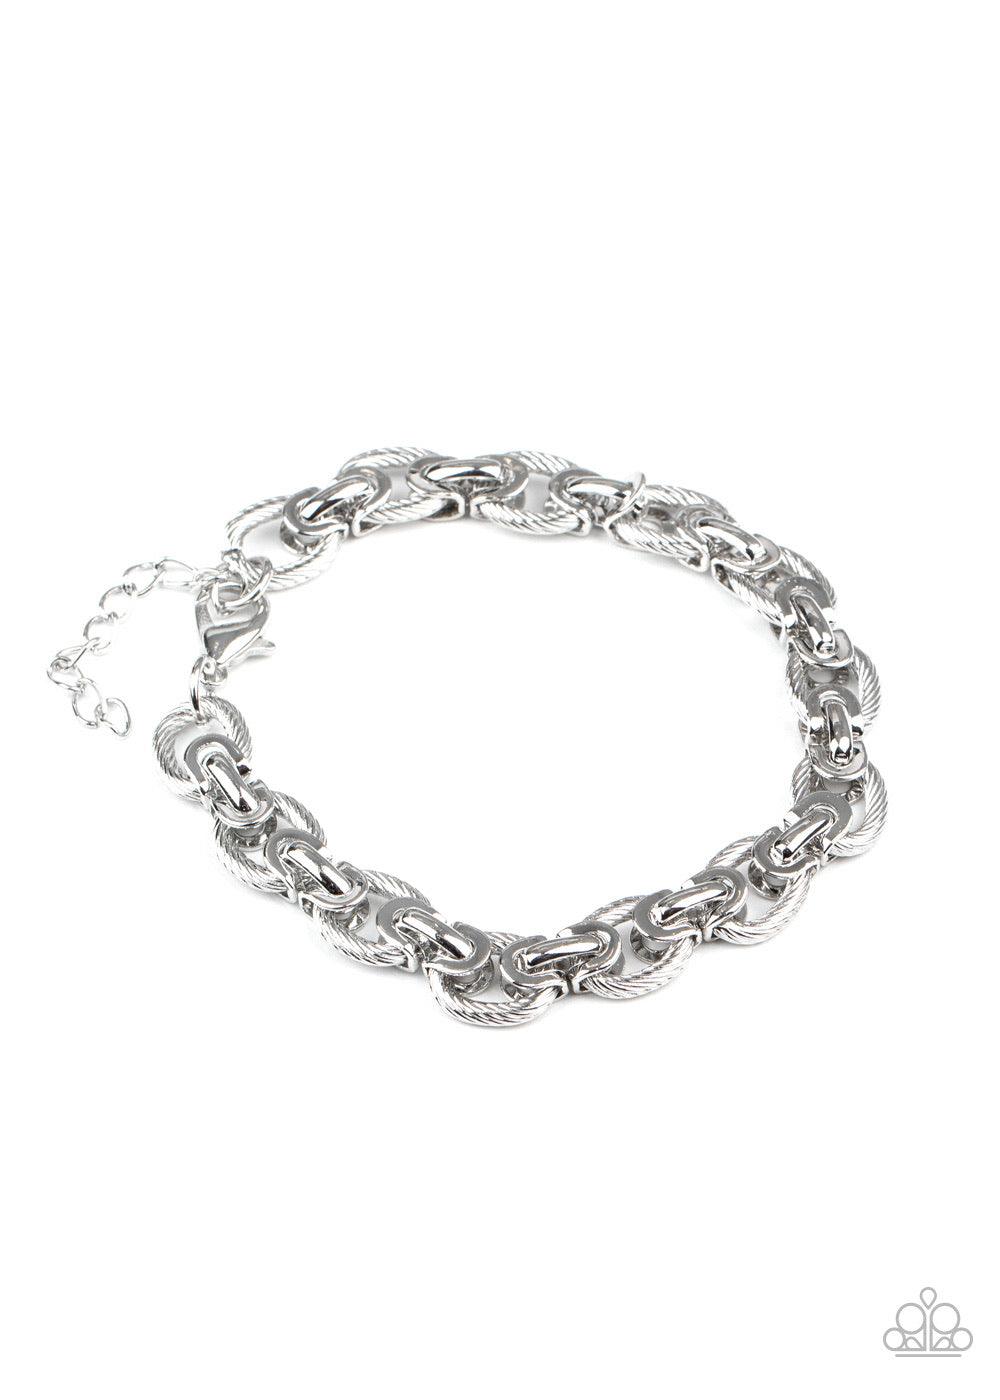 Paparazzi Accessories Gridiron Grunge - Silver Textured silver links are joined together with sleek silver fittings around the wrist, creating an ornate chain. Features an adjustable clasp closure. Jewelry